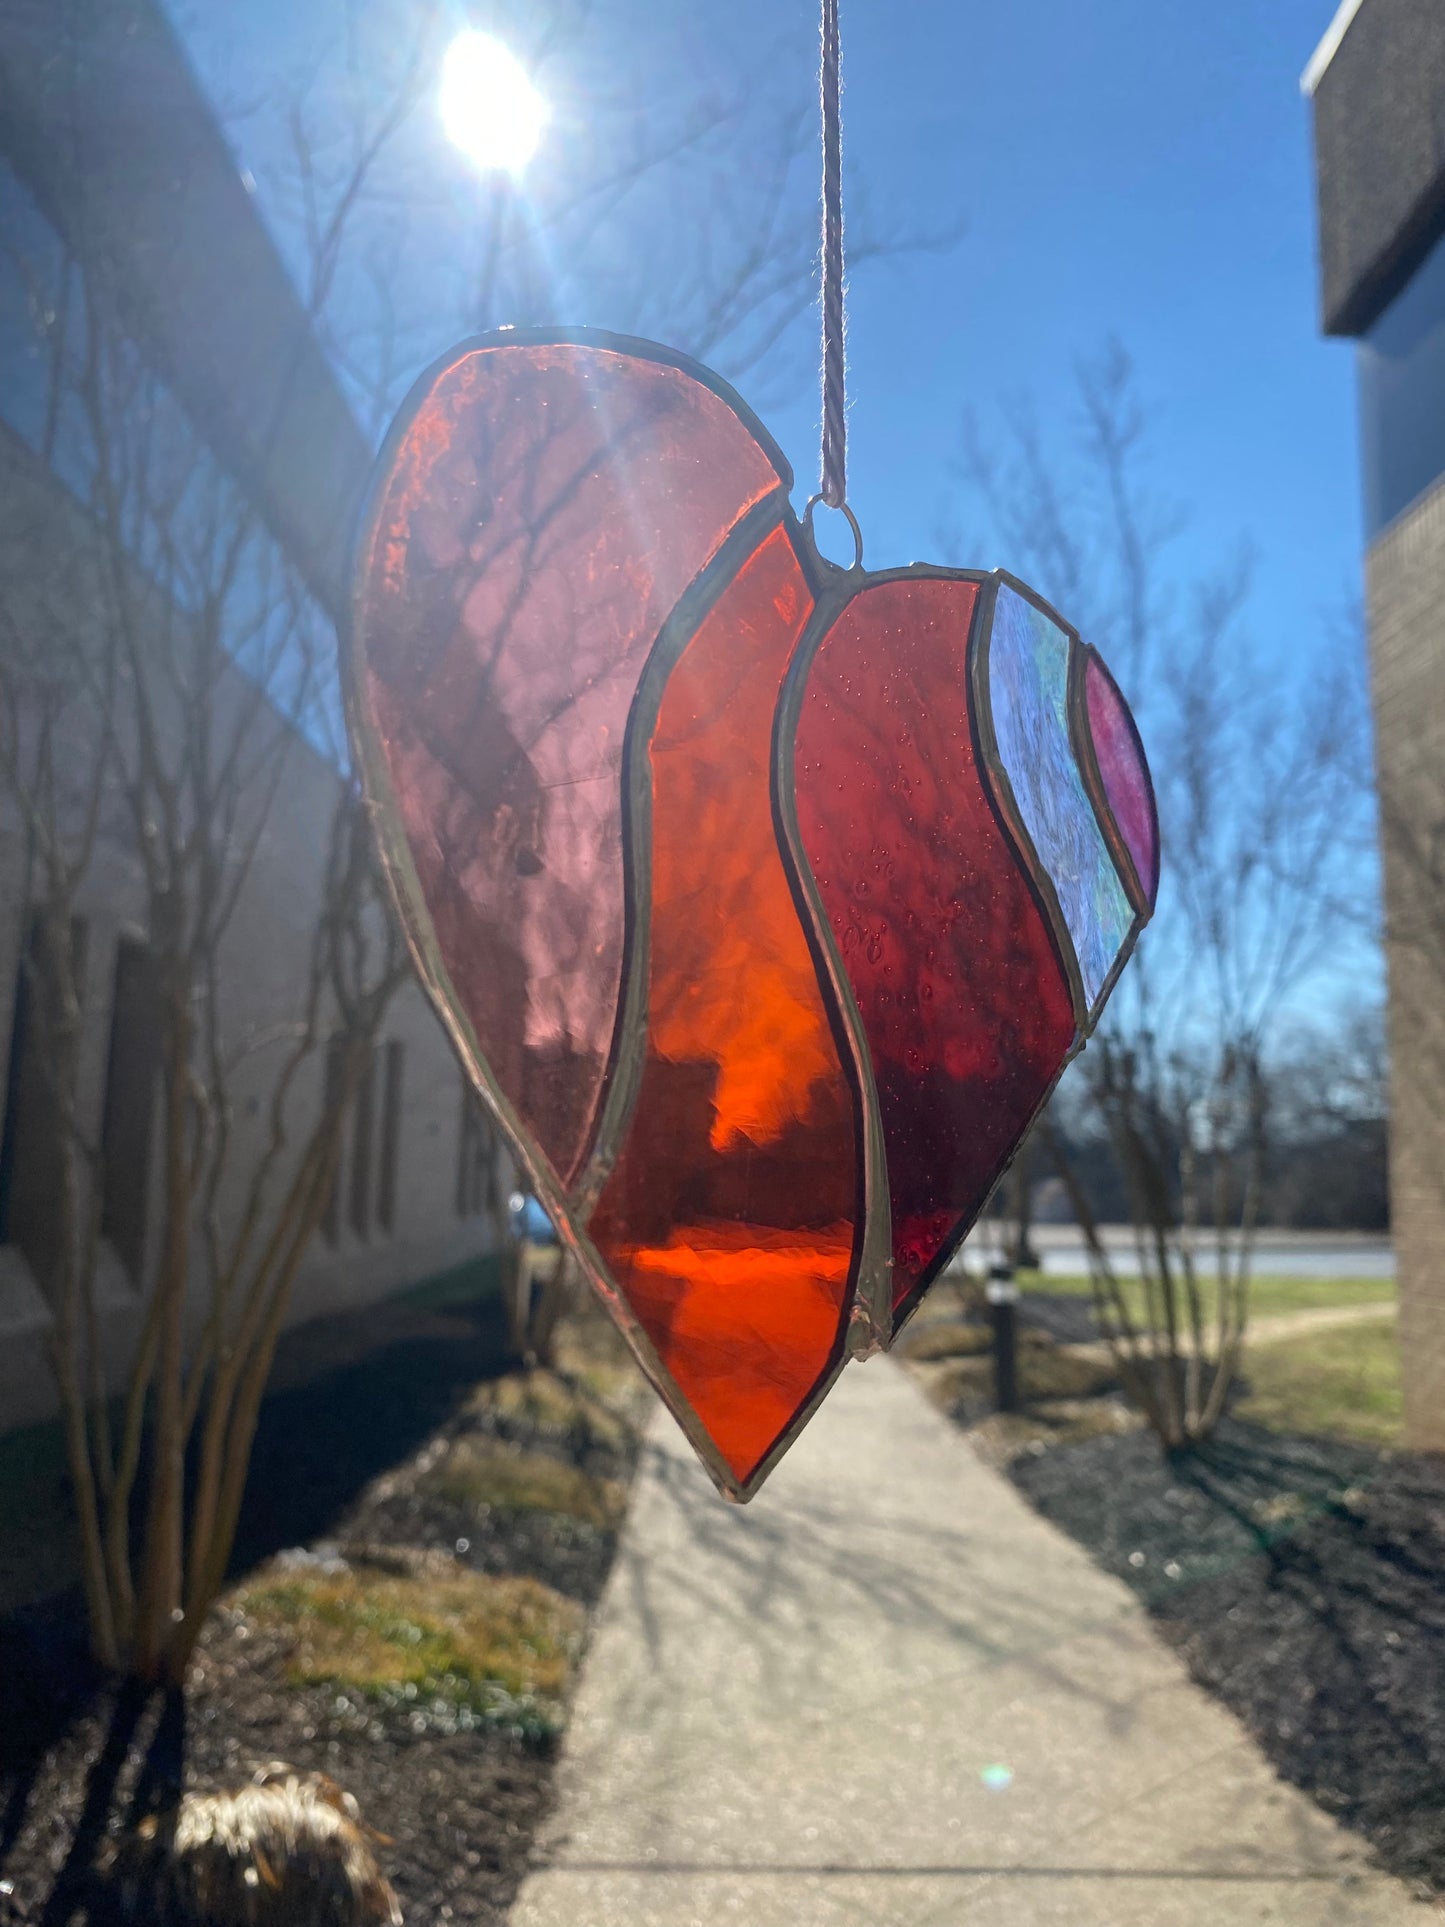 Beginner Stained Glass class, March 30, 11-2